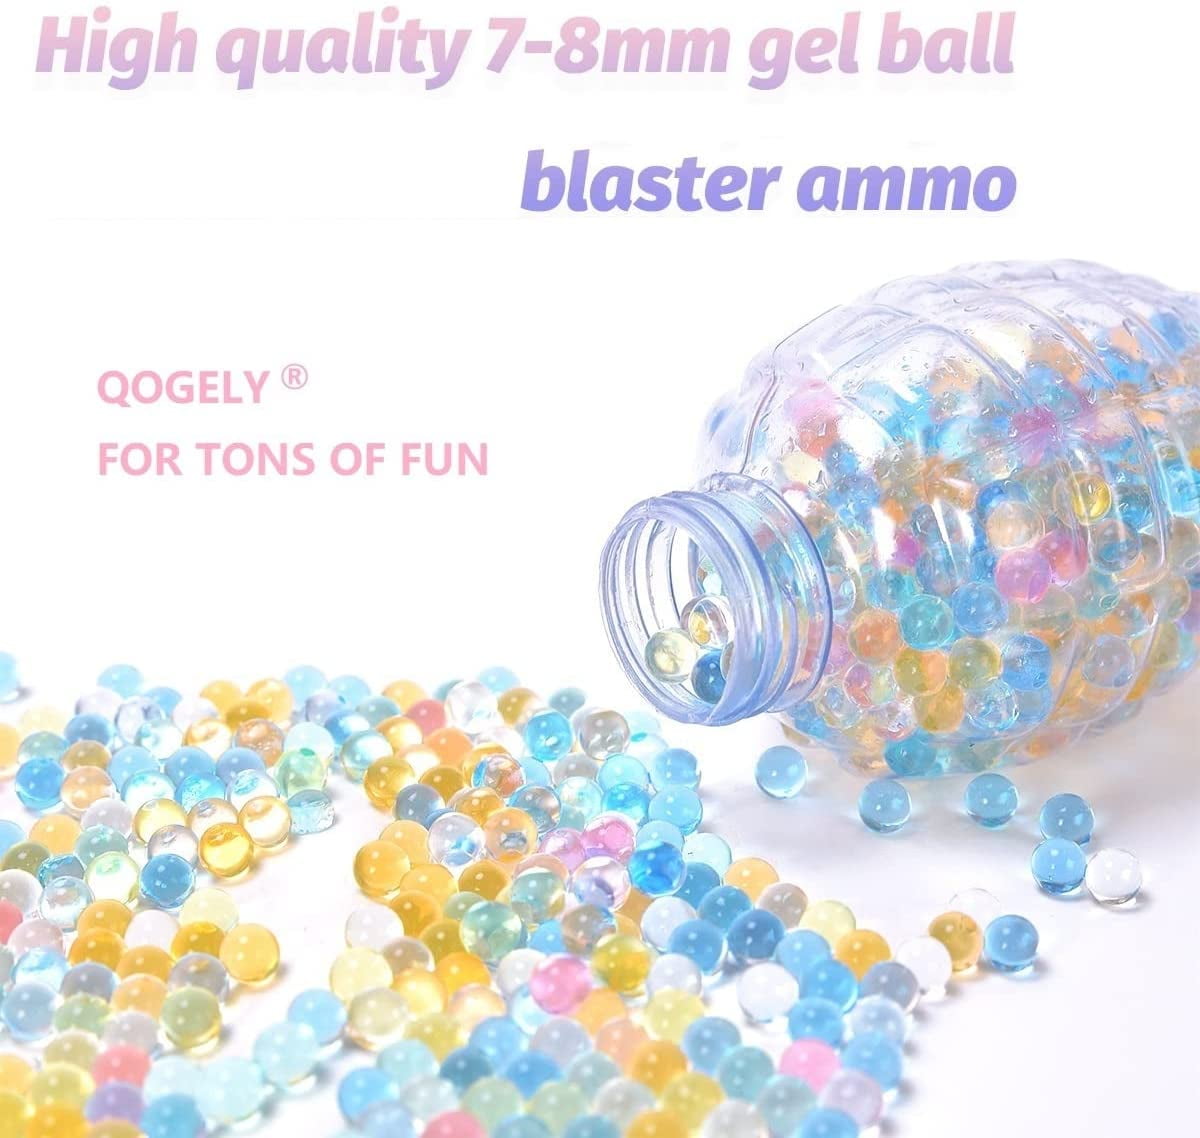 90000 Water Ball Beads Refill Ammo with Compressible Bottle 7-8mm Gel Balls  Water Beads Set Gel Balls Per Pack BB Gel Paint Ball - AliExpress